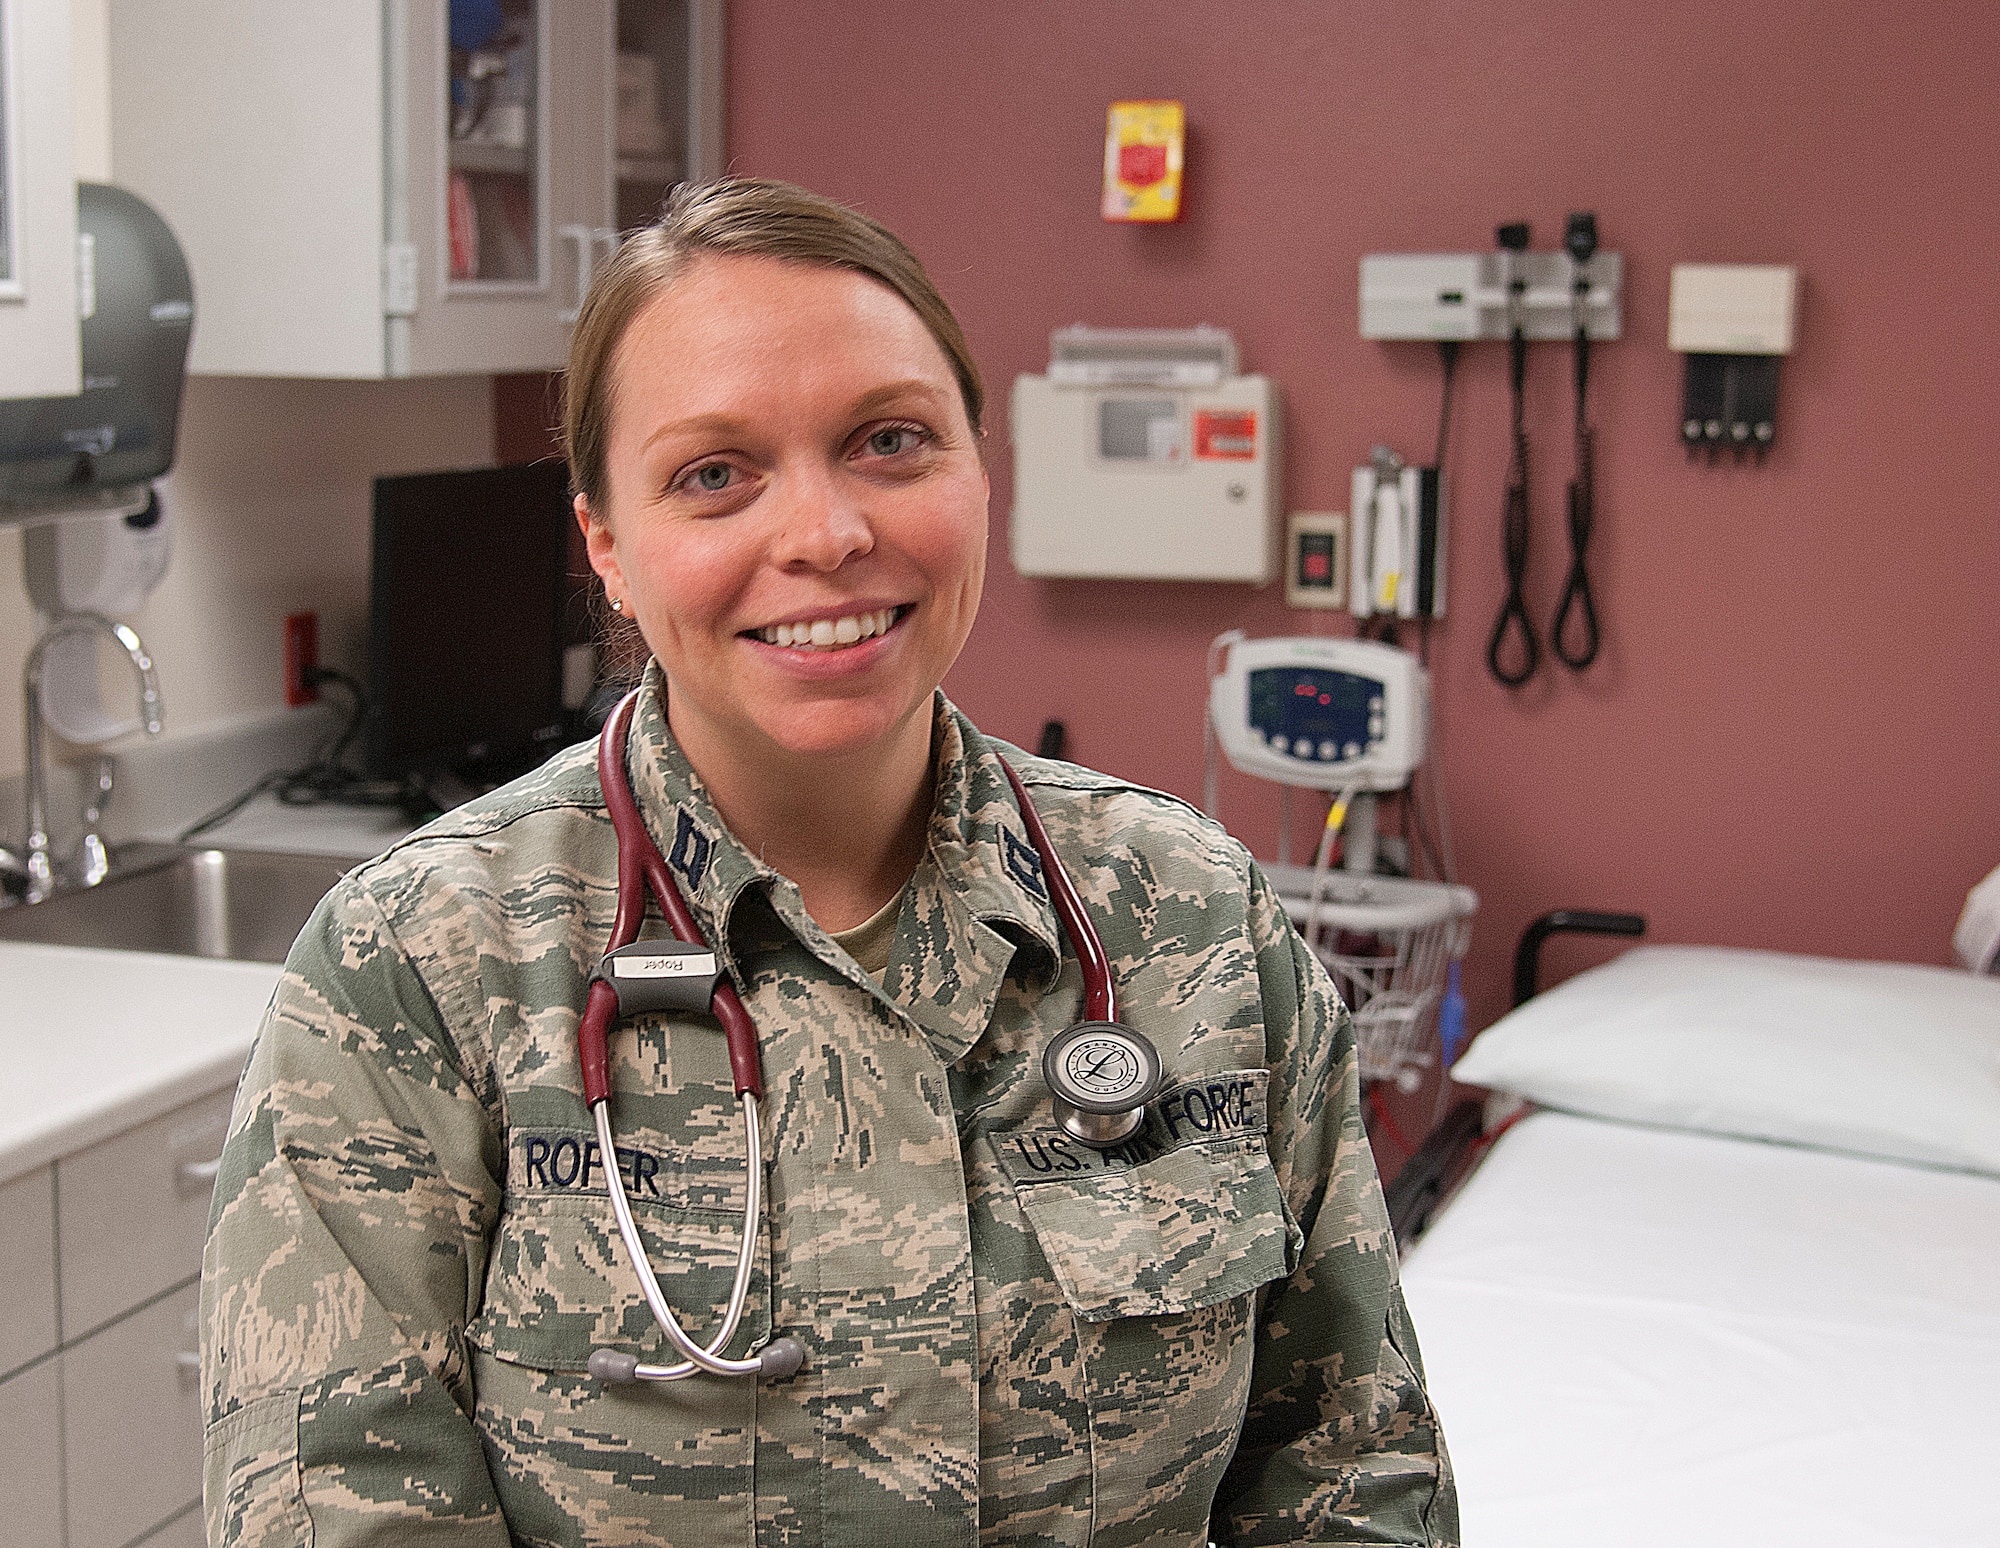 Capt. Jennifer Roper, 90th Medical Operations Squadron family physician, poses in the 90th Medical Group Medical Treatment Facility Aug. 18, 2015, on F.E. Warren Air Force Base, Wyo. Roper offered advice on how to prevent Rhabdomyolysis, the build-up of intracellular material in the blood from damaged muscles, which included staying hydrated and knowing one’s limits during exercise. (U.S. Air Force photo by Senior Airman Jason Wiese)